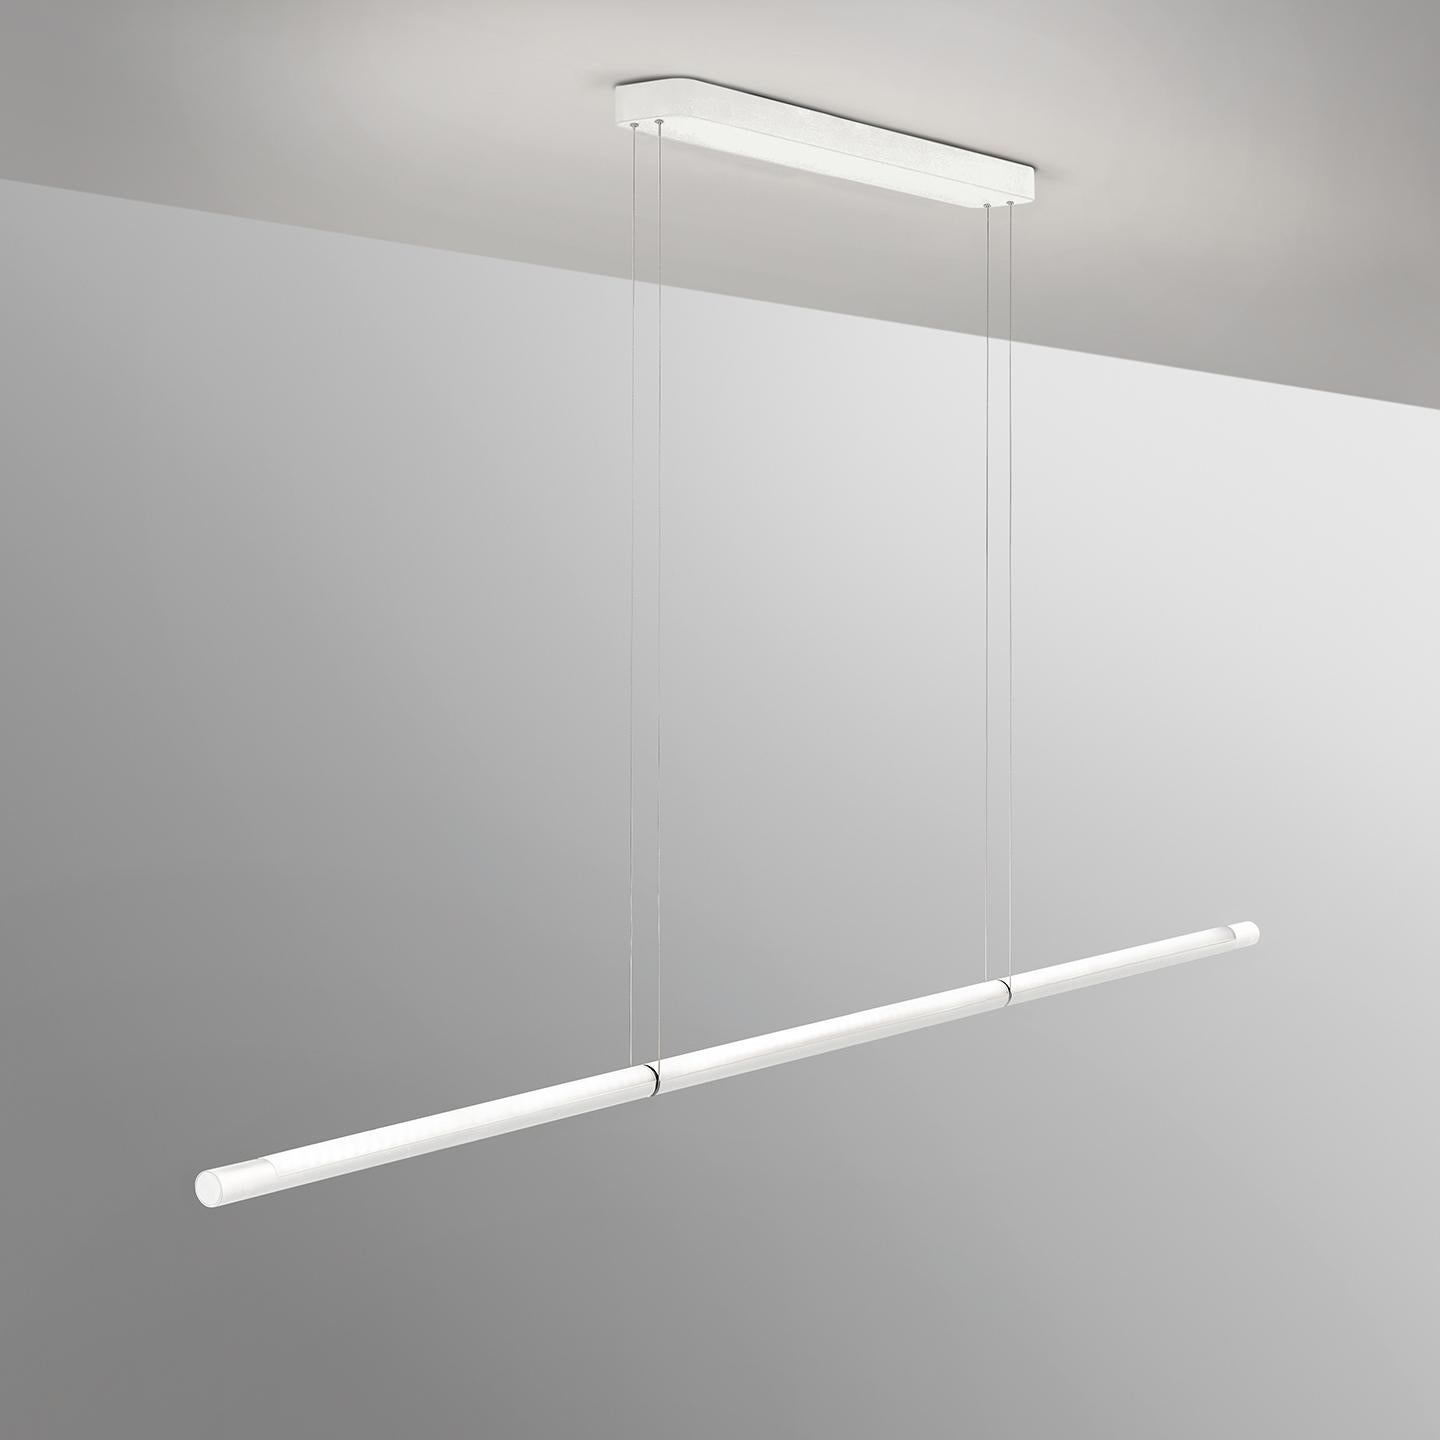 The Volta, by From Industrial Design, is an innovative linear suspension lamp that takes state of the art technology and compacts it into a simple form and user experience. The lamp floats on two cables that both power the light and suspend it. The